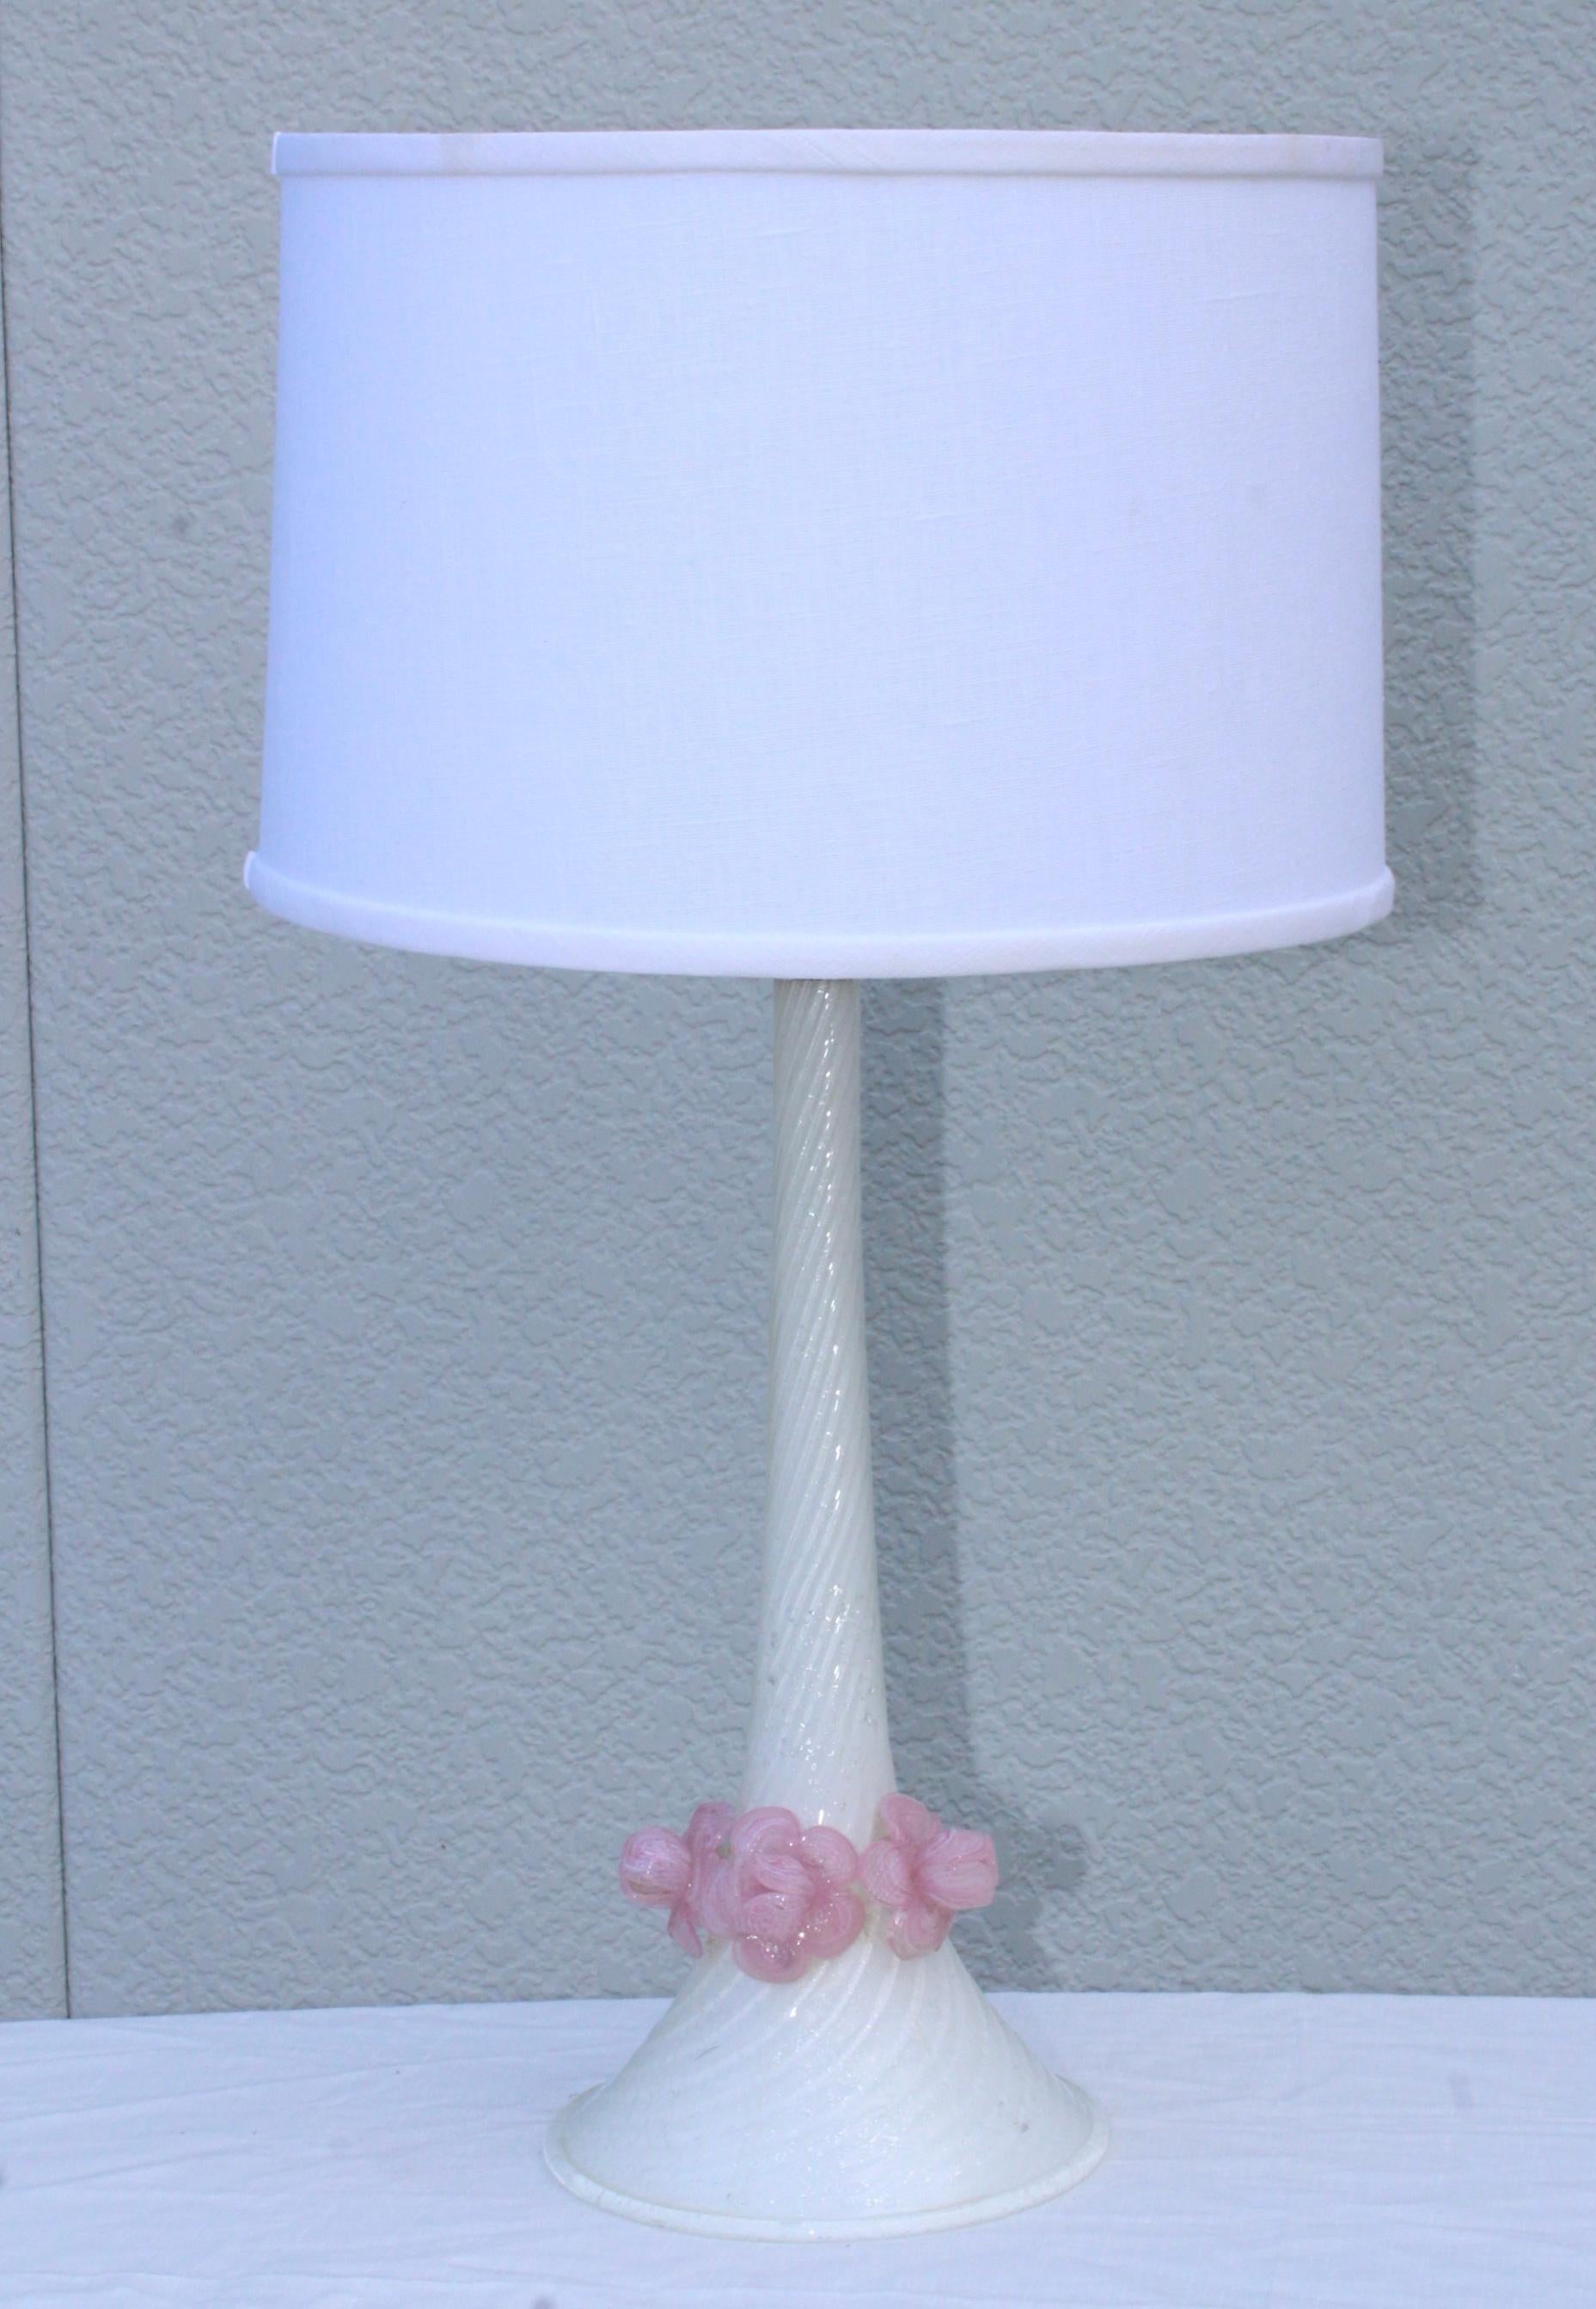 Stunning 1950's Venetian glass table lamp with pink flower motif, in vintage original condition with minor wear and patina.

Height to light socket 19.75''
shade for photography only.